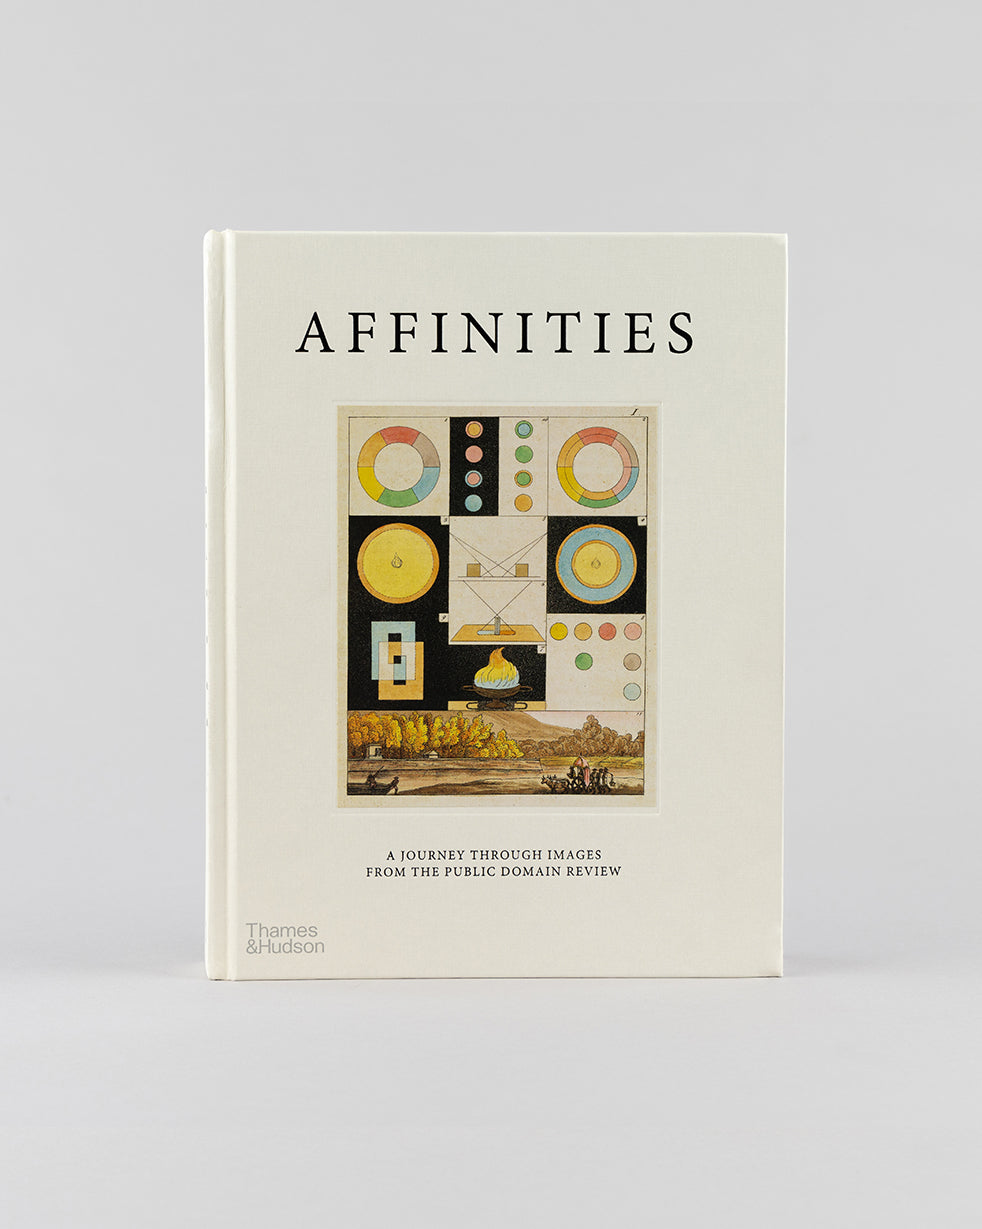 Affinities: A Journey Through Images from the Public Domain Review